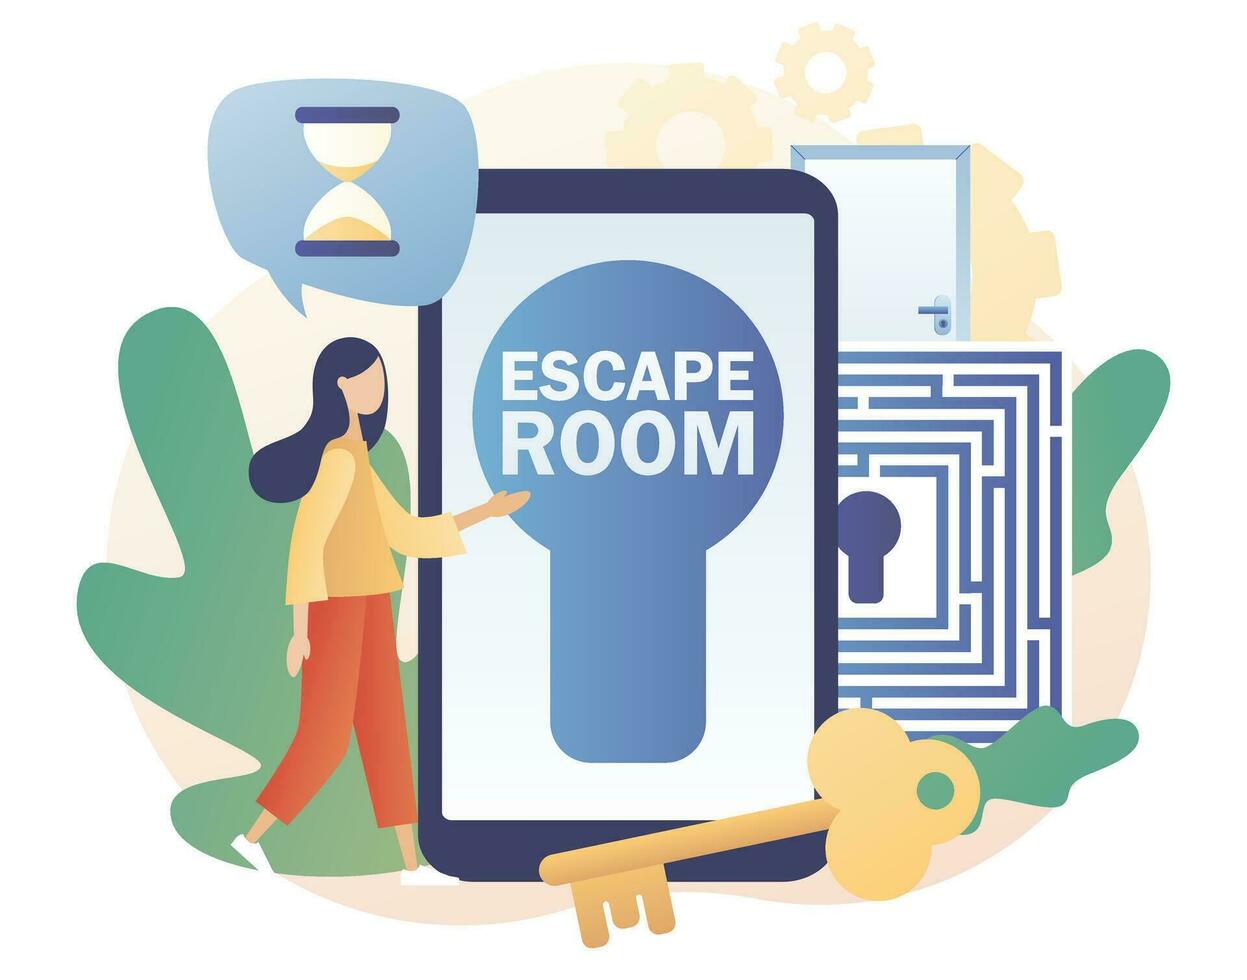 Quest room. Escape room smartphone app. Tiny girl trying to solve puzzles, find key, gettout of trap, finding conundrum solution. Exit maze. Modern flat cartoon style. Vector illustration